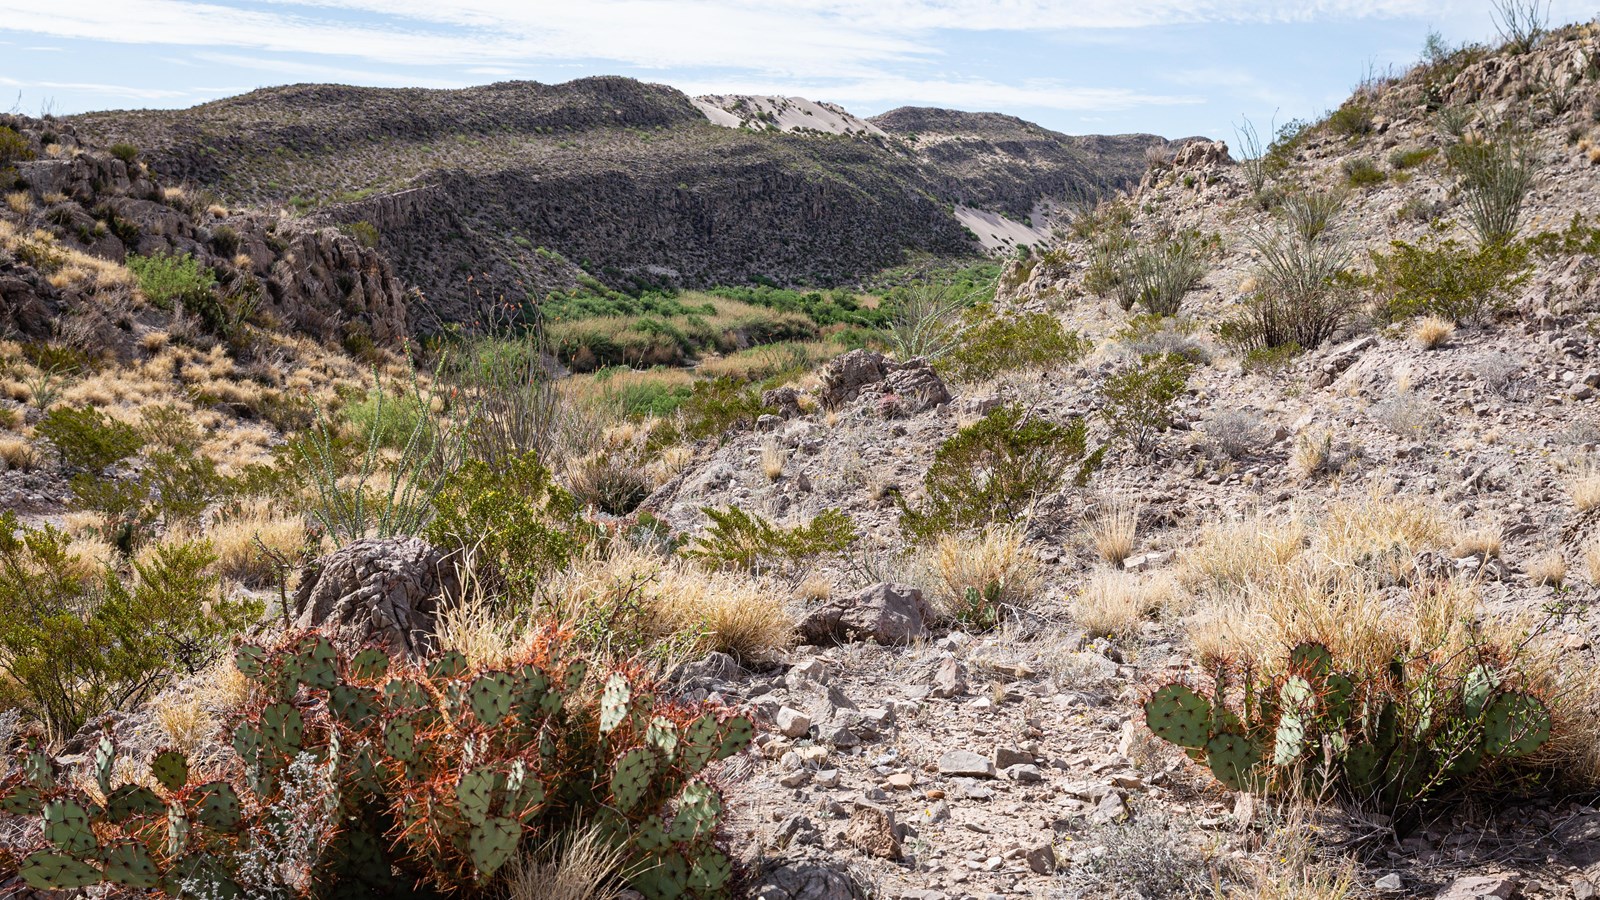 Prickly pear cactus, creosote bush, and ocotillo grow on side of a rocky slope.